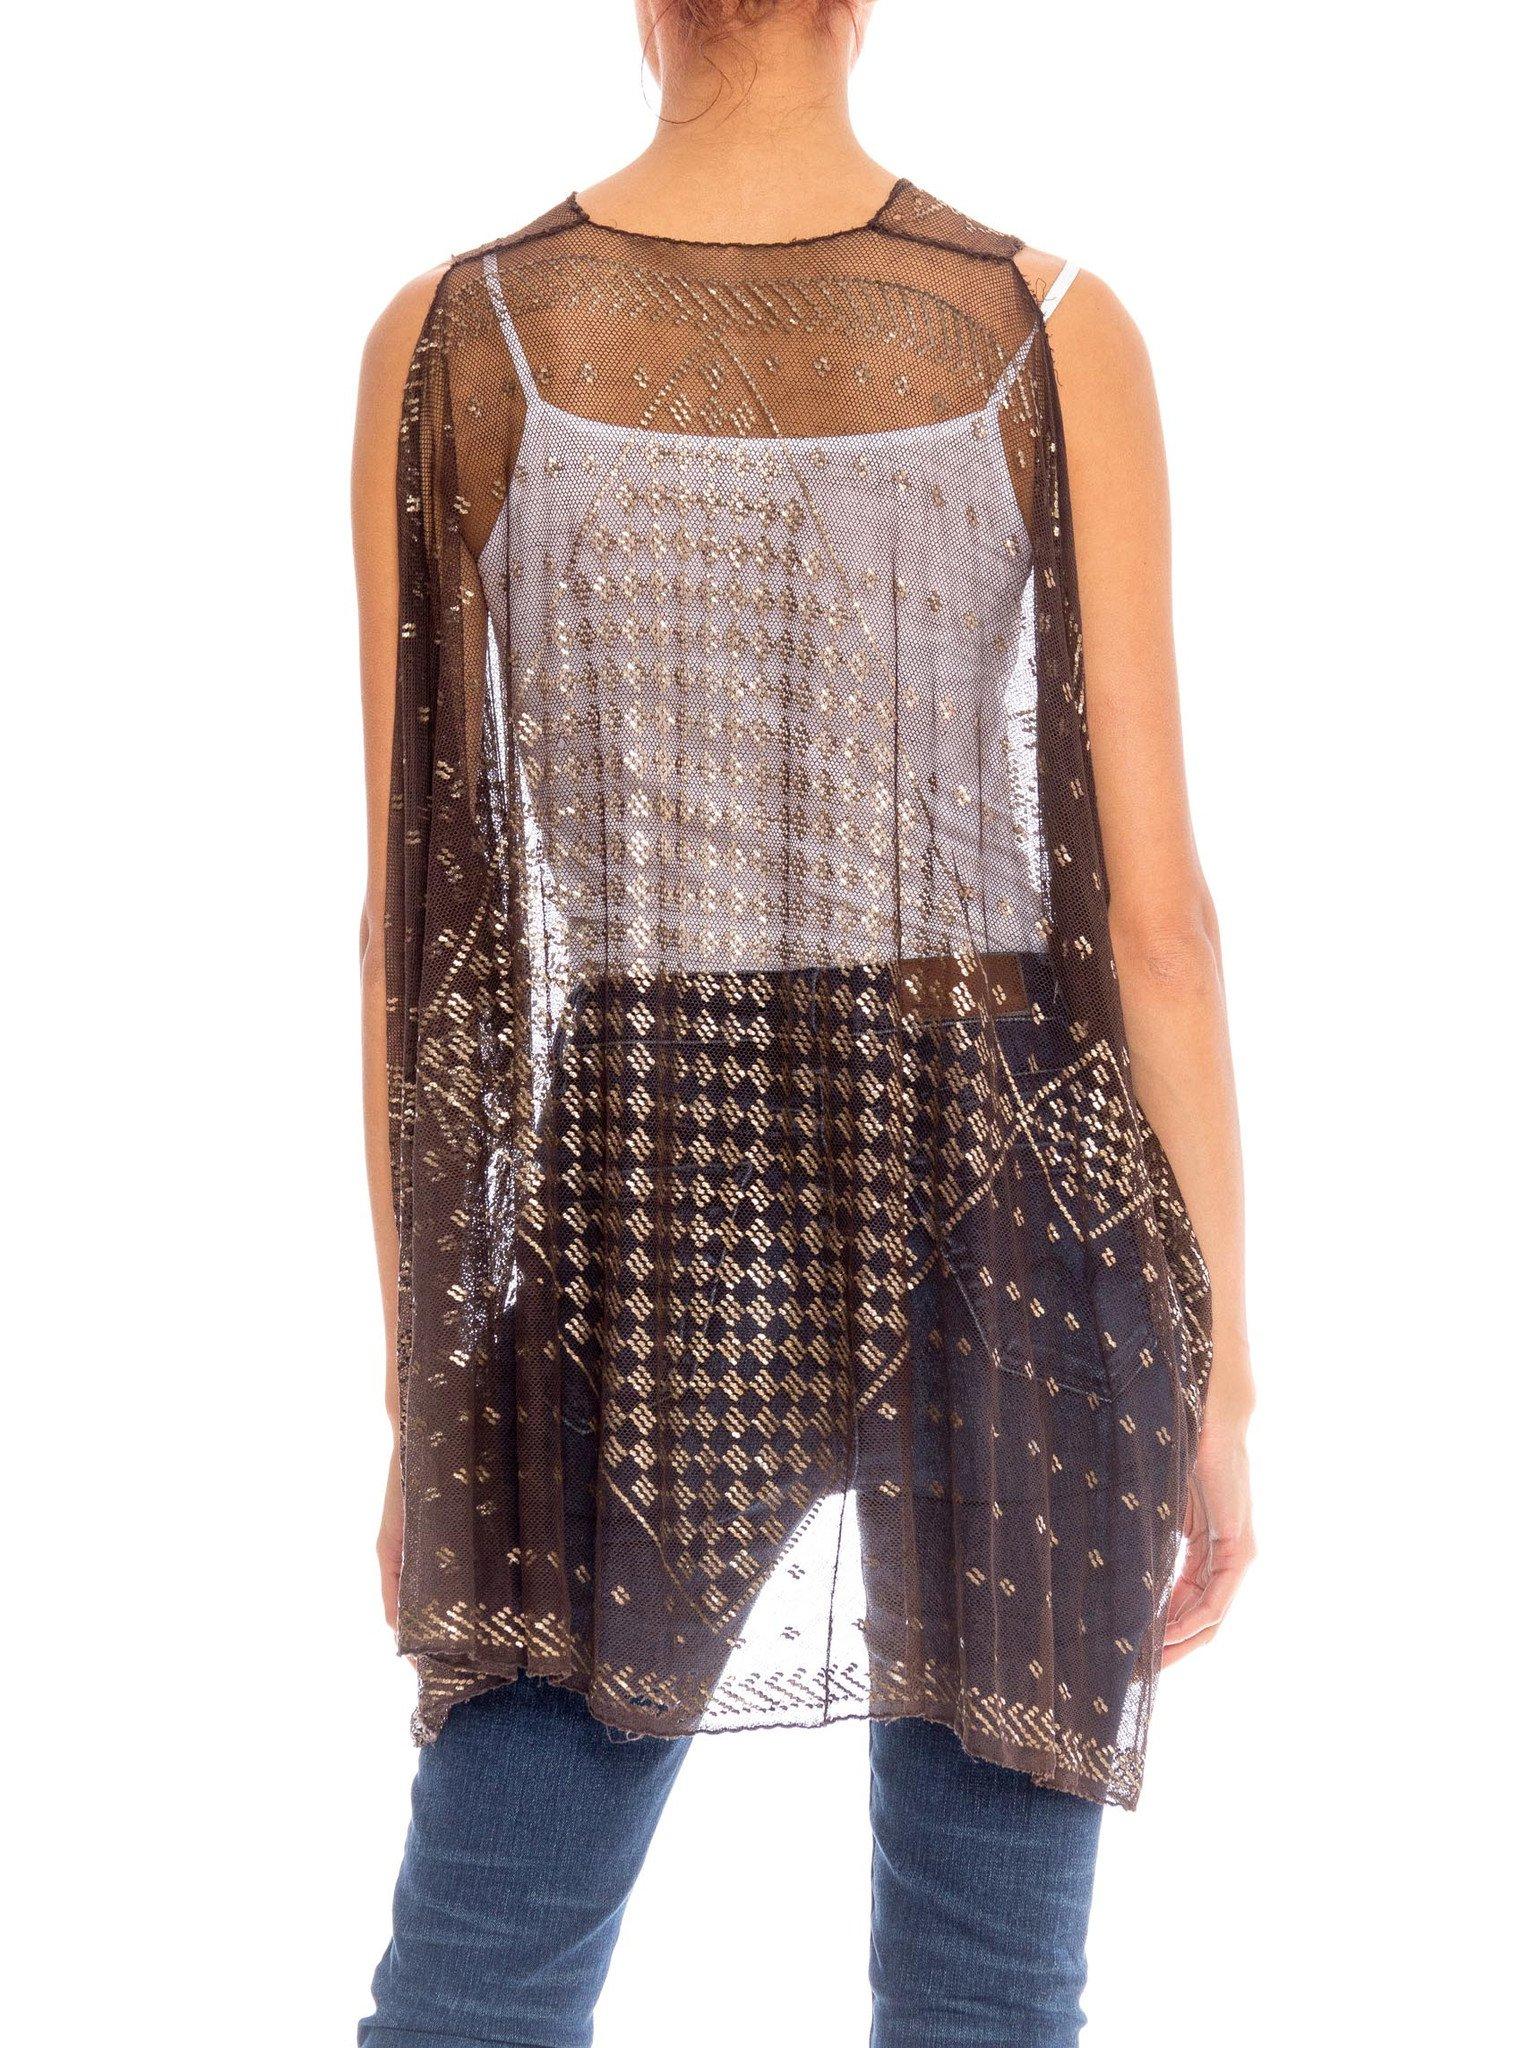 MORPHEW COLLECTION Chocolate Brown & Silver Egyptian Assuit Sheer Draped Vest In Excellent Condition For Sale In New York, NY